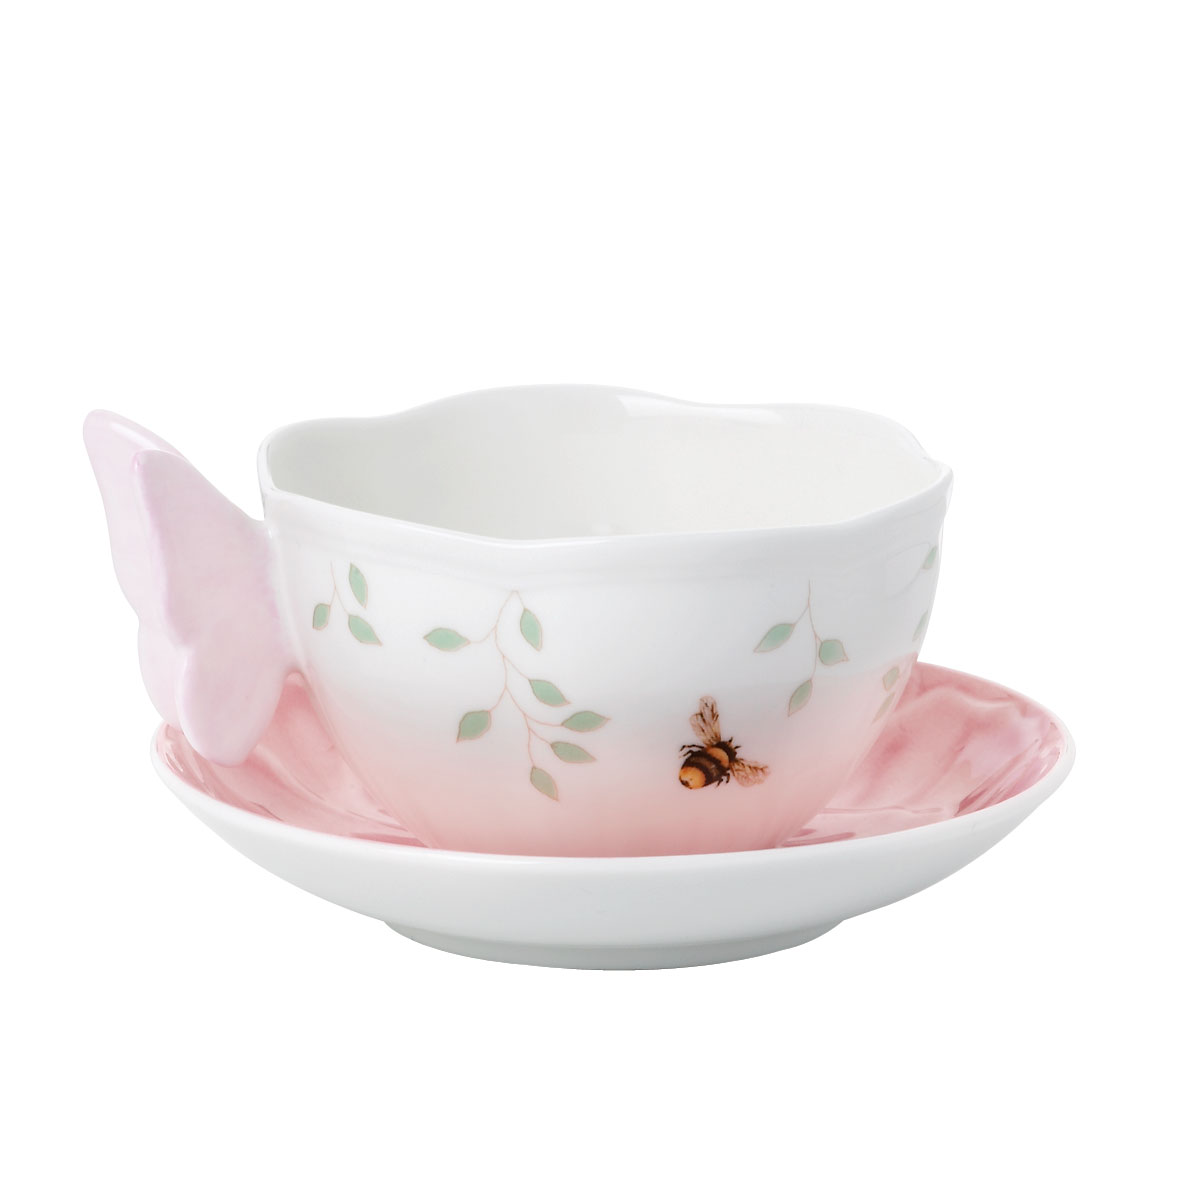 Lenox Butterfly Meadow China Figurine Pnk Cup And Saucer